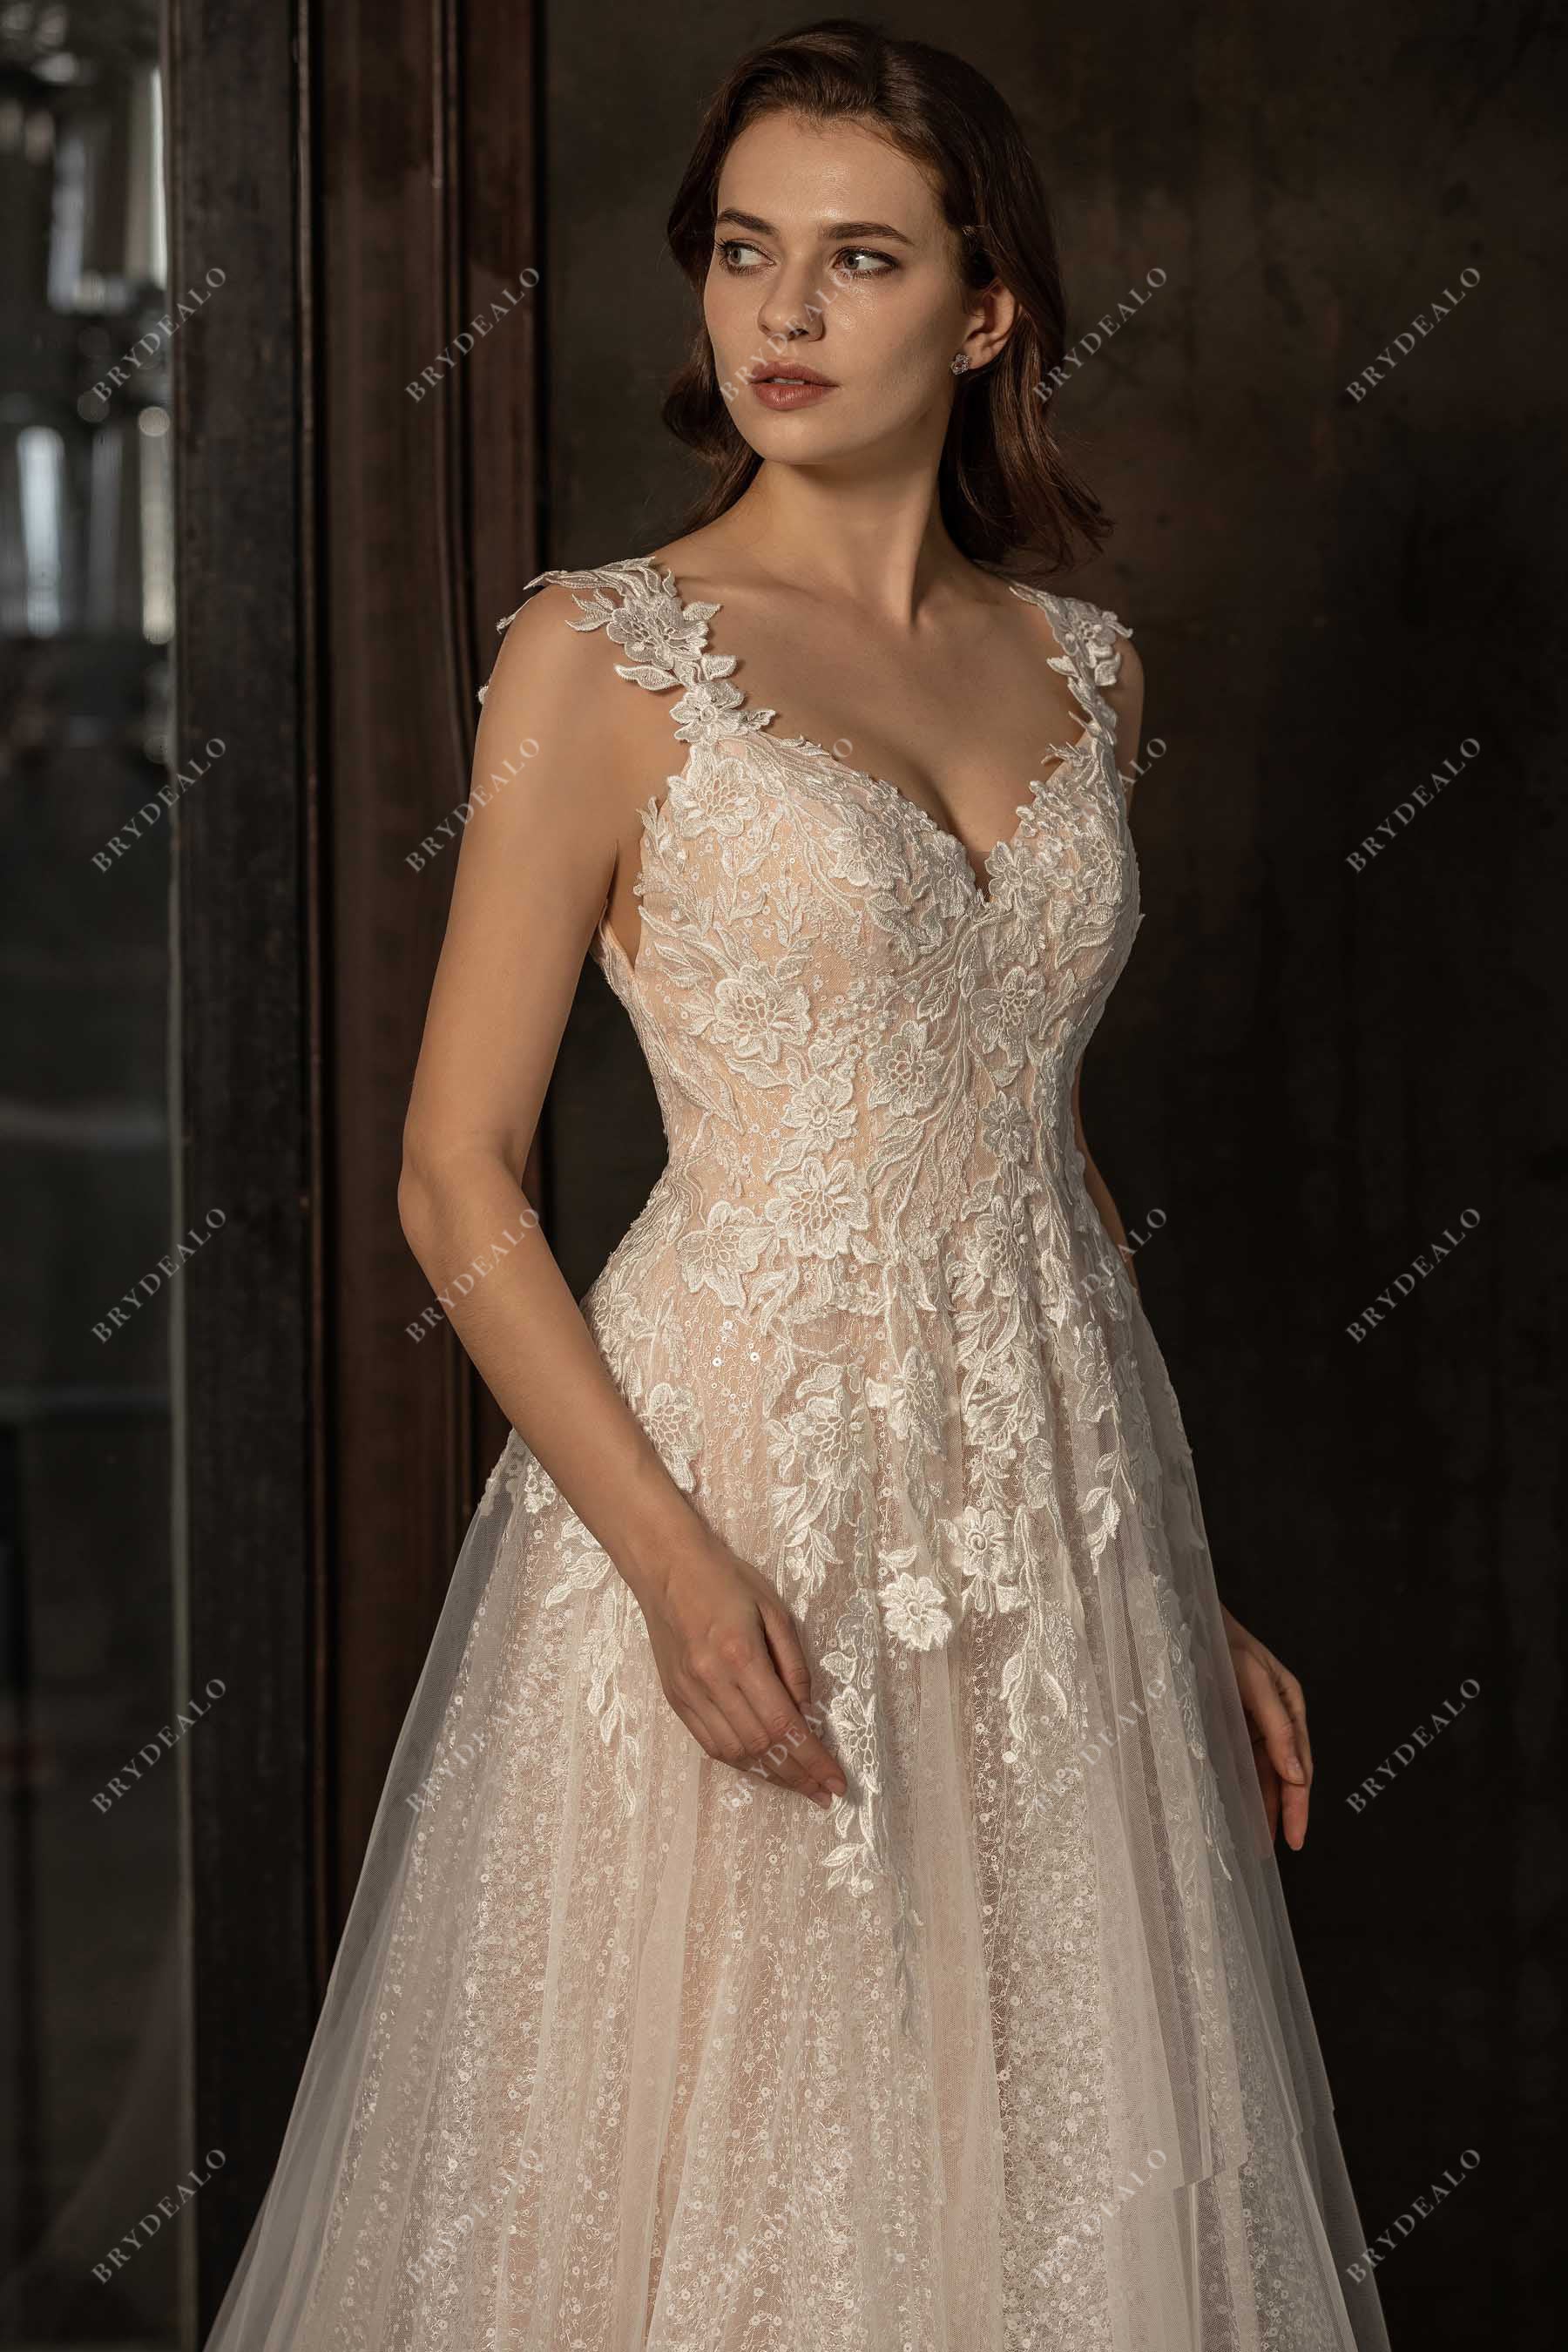 Designer Light Ivory Strap Lace Tulle A-line Wedding Dress with Court Train